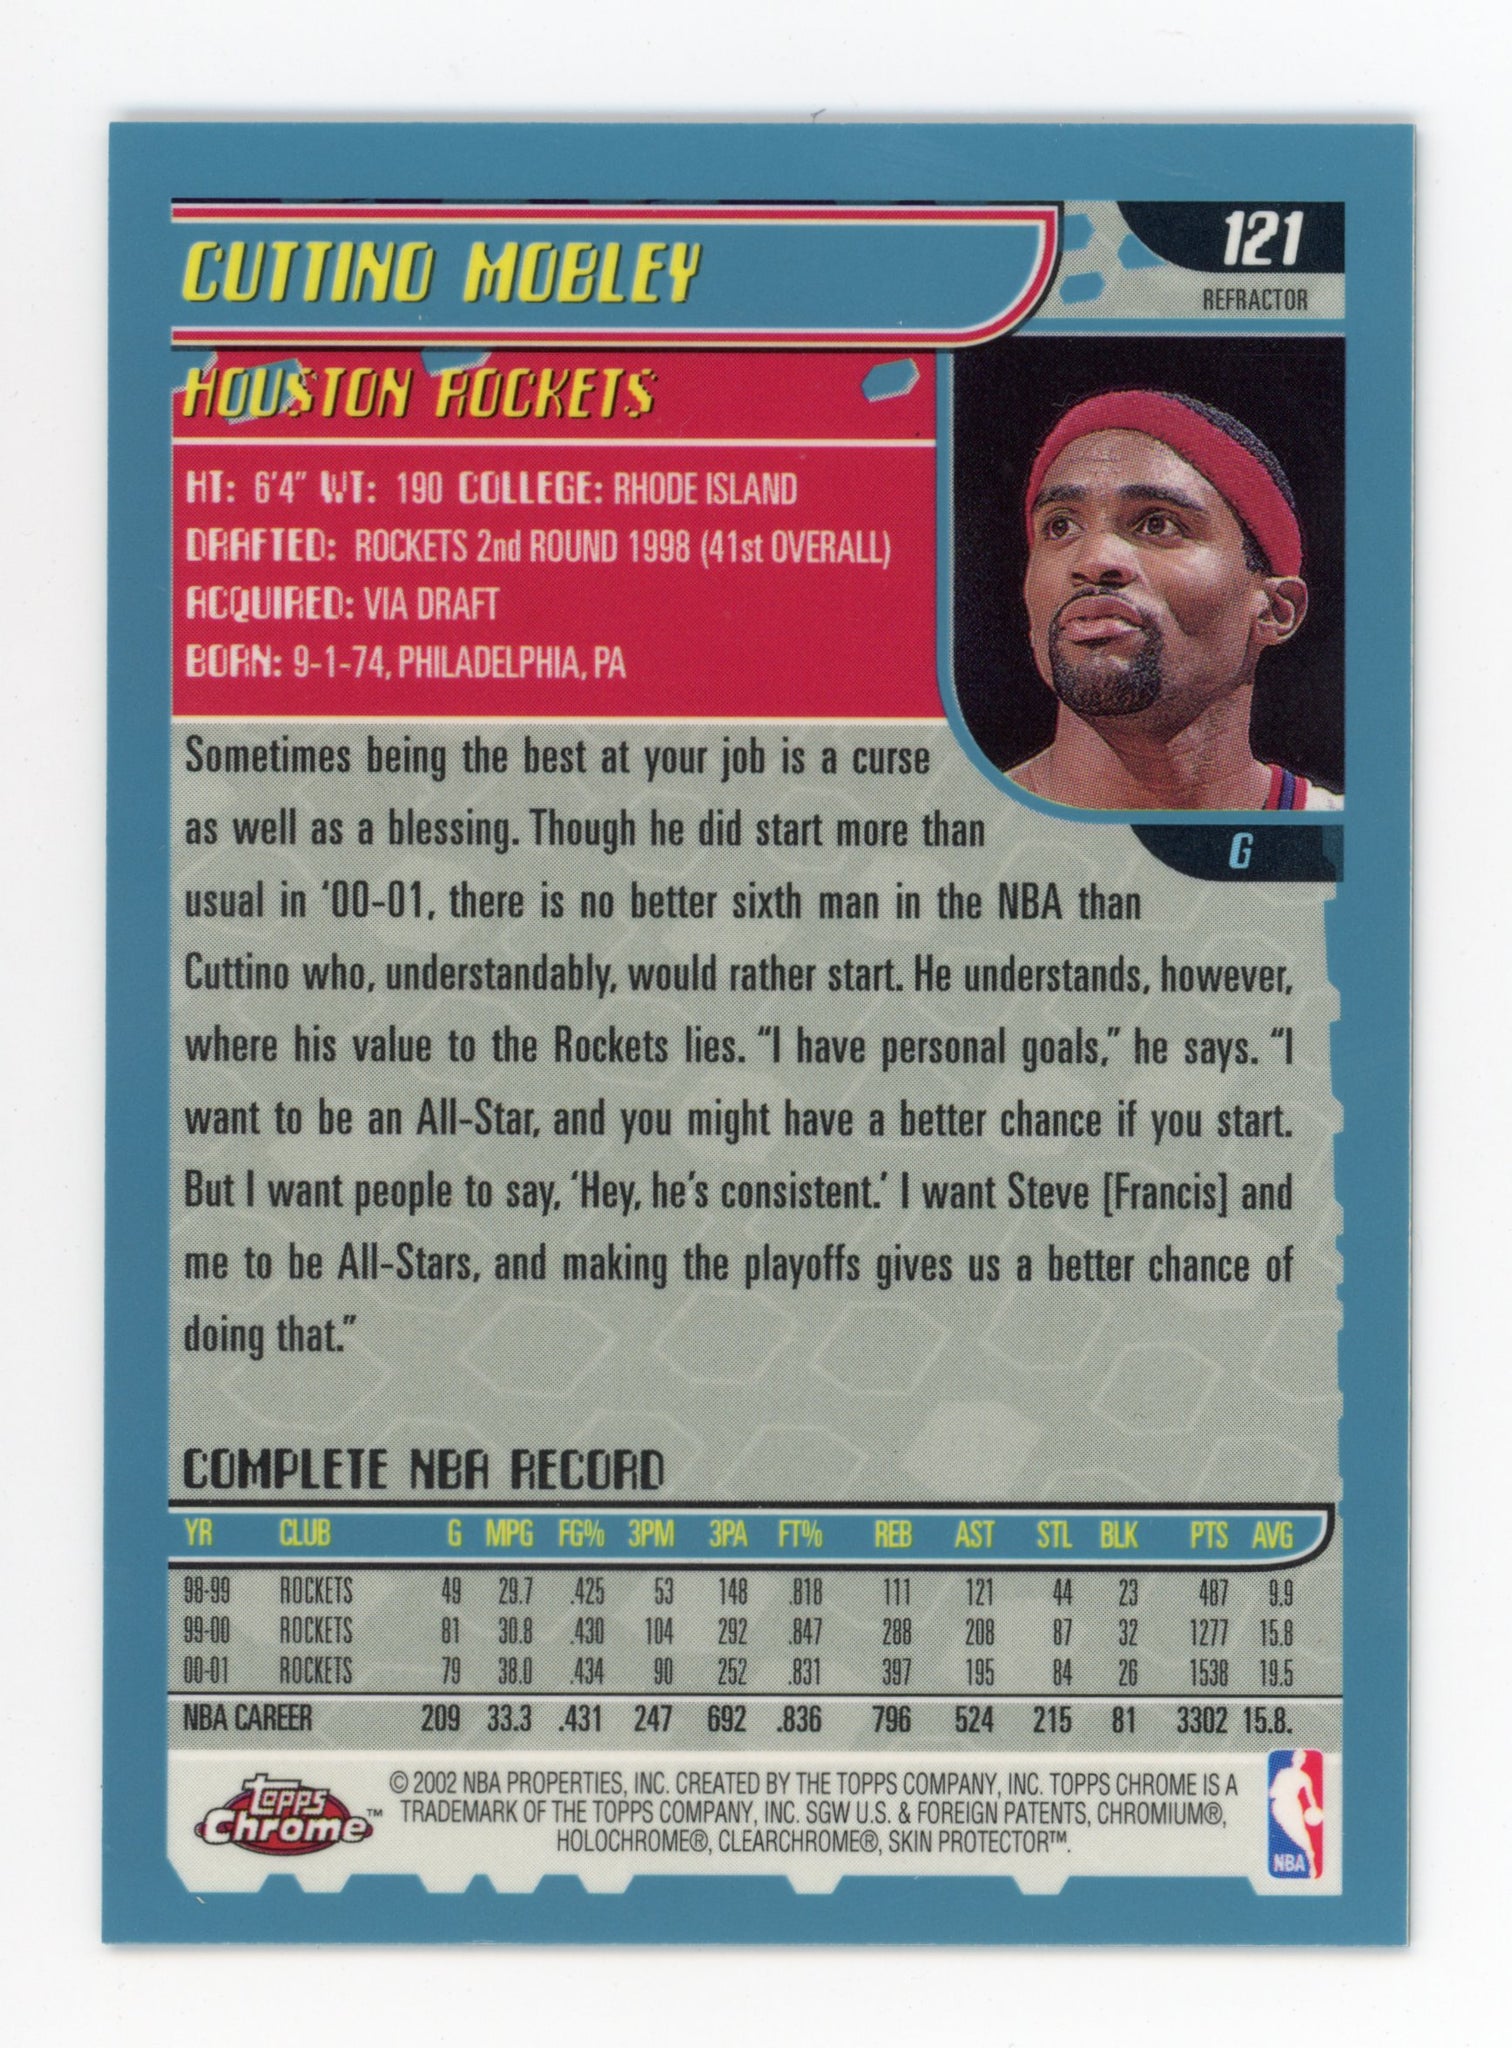 Cuttino Mobley Topps Chrome 2020 Refractor Houston Rockets #121